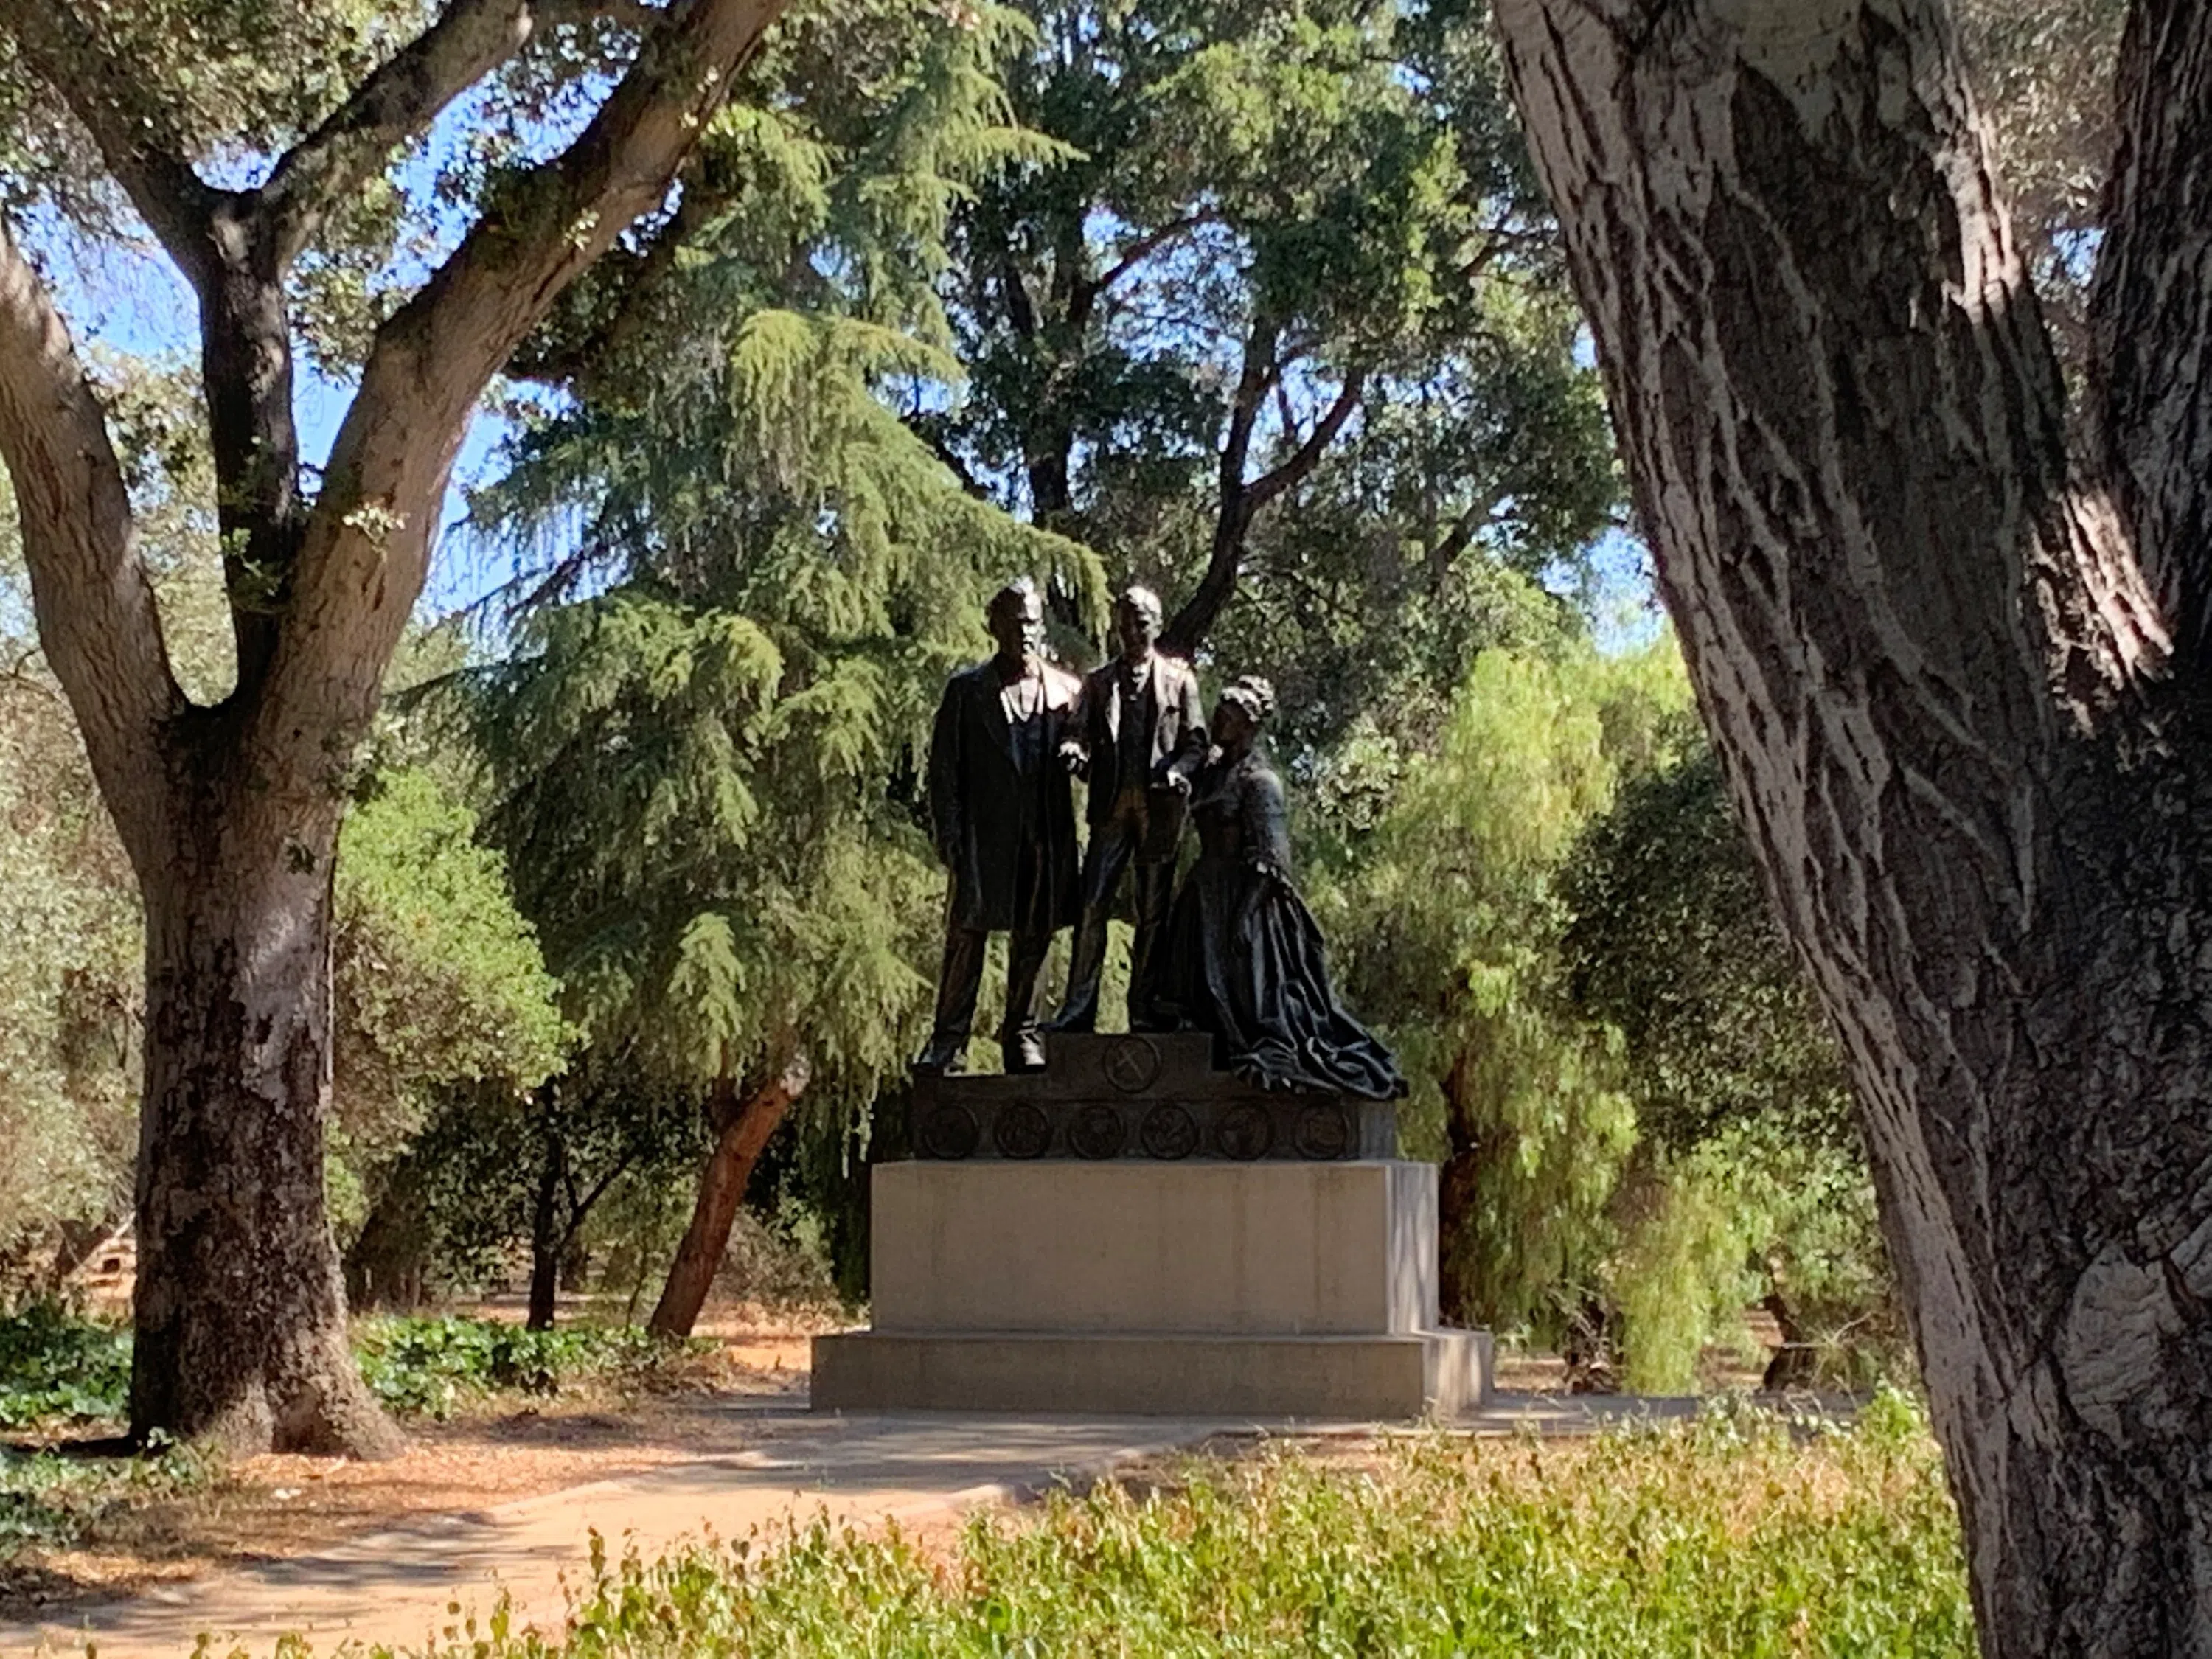 Pedestal containing a bronze statue of the three members of the Stanford family, located amidst trees in the Arboretum